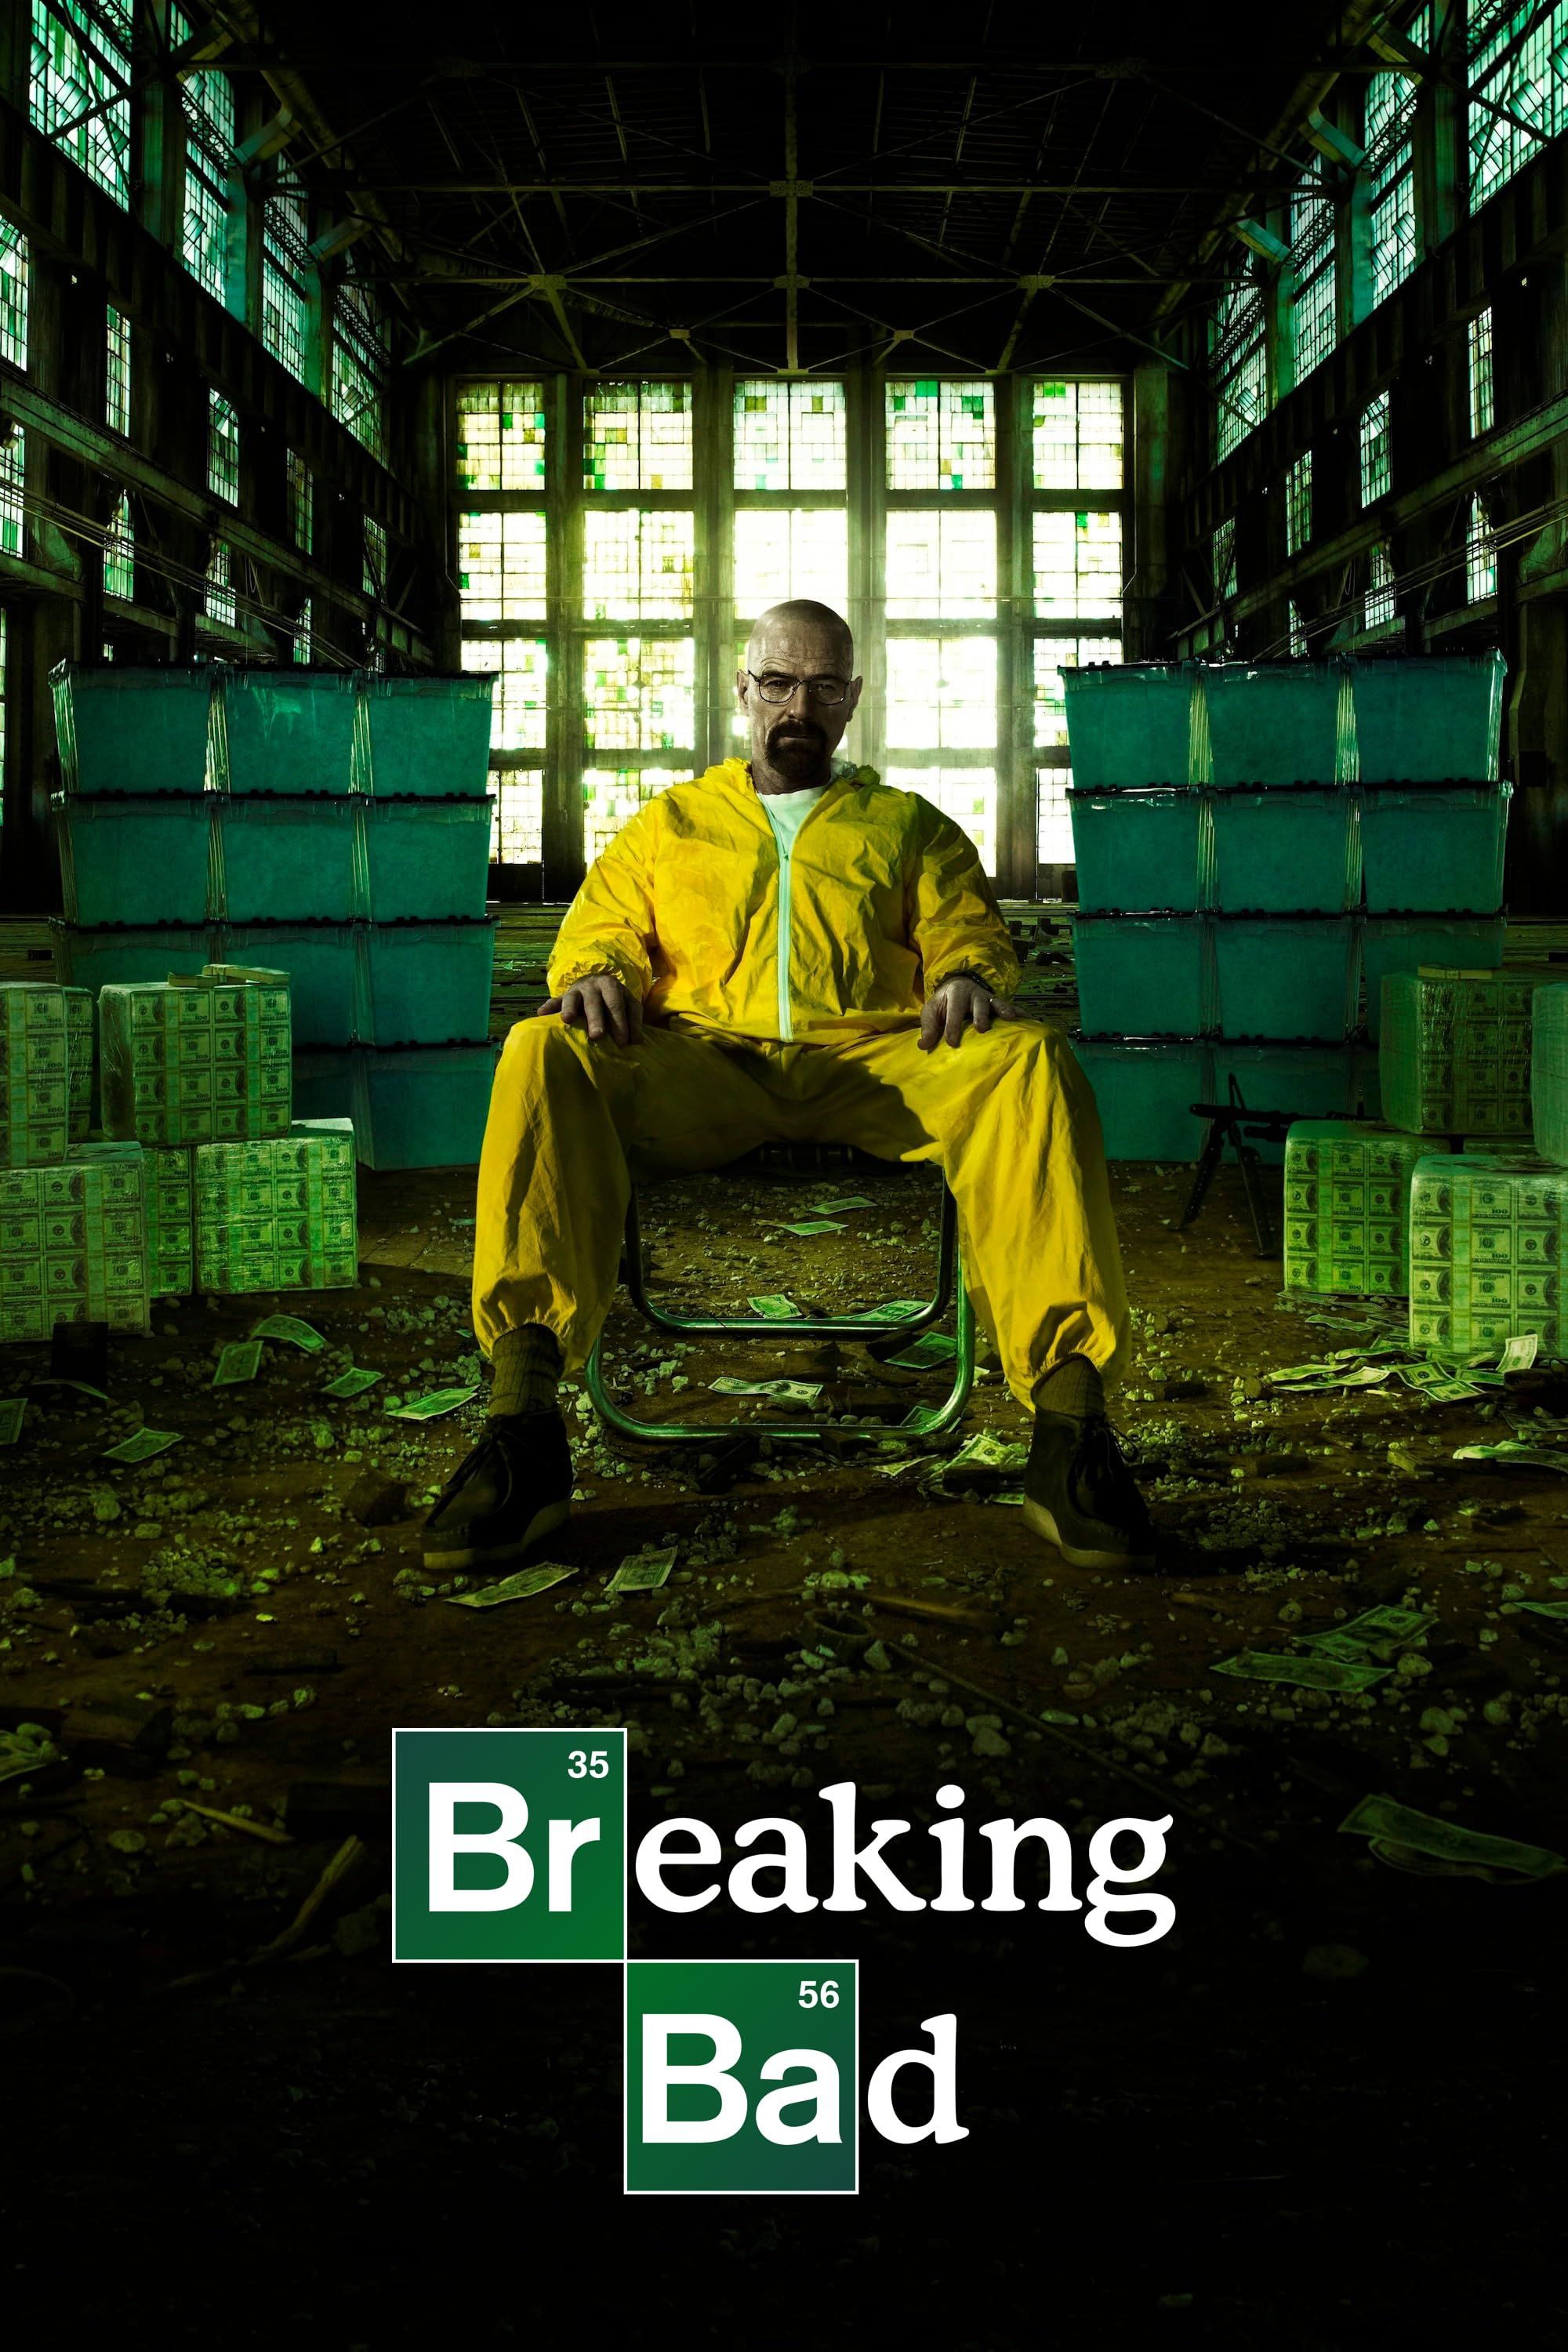 Breaking Bad S02 E02 Hindi Dubbed NF Series